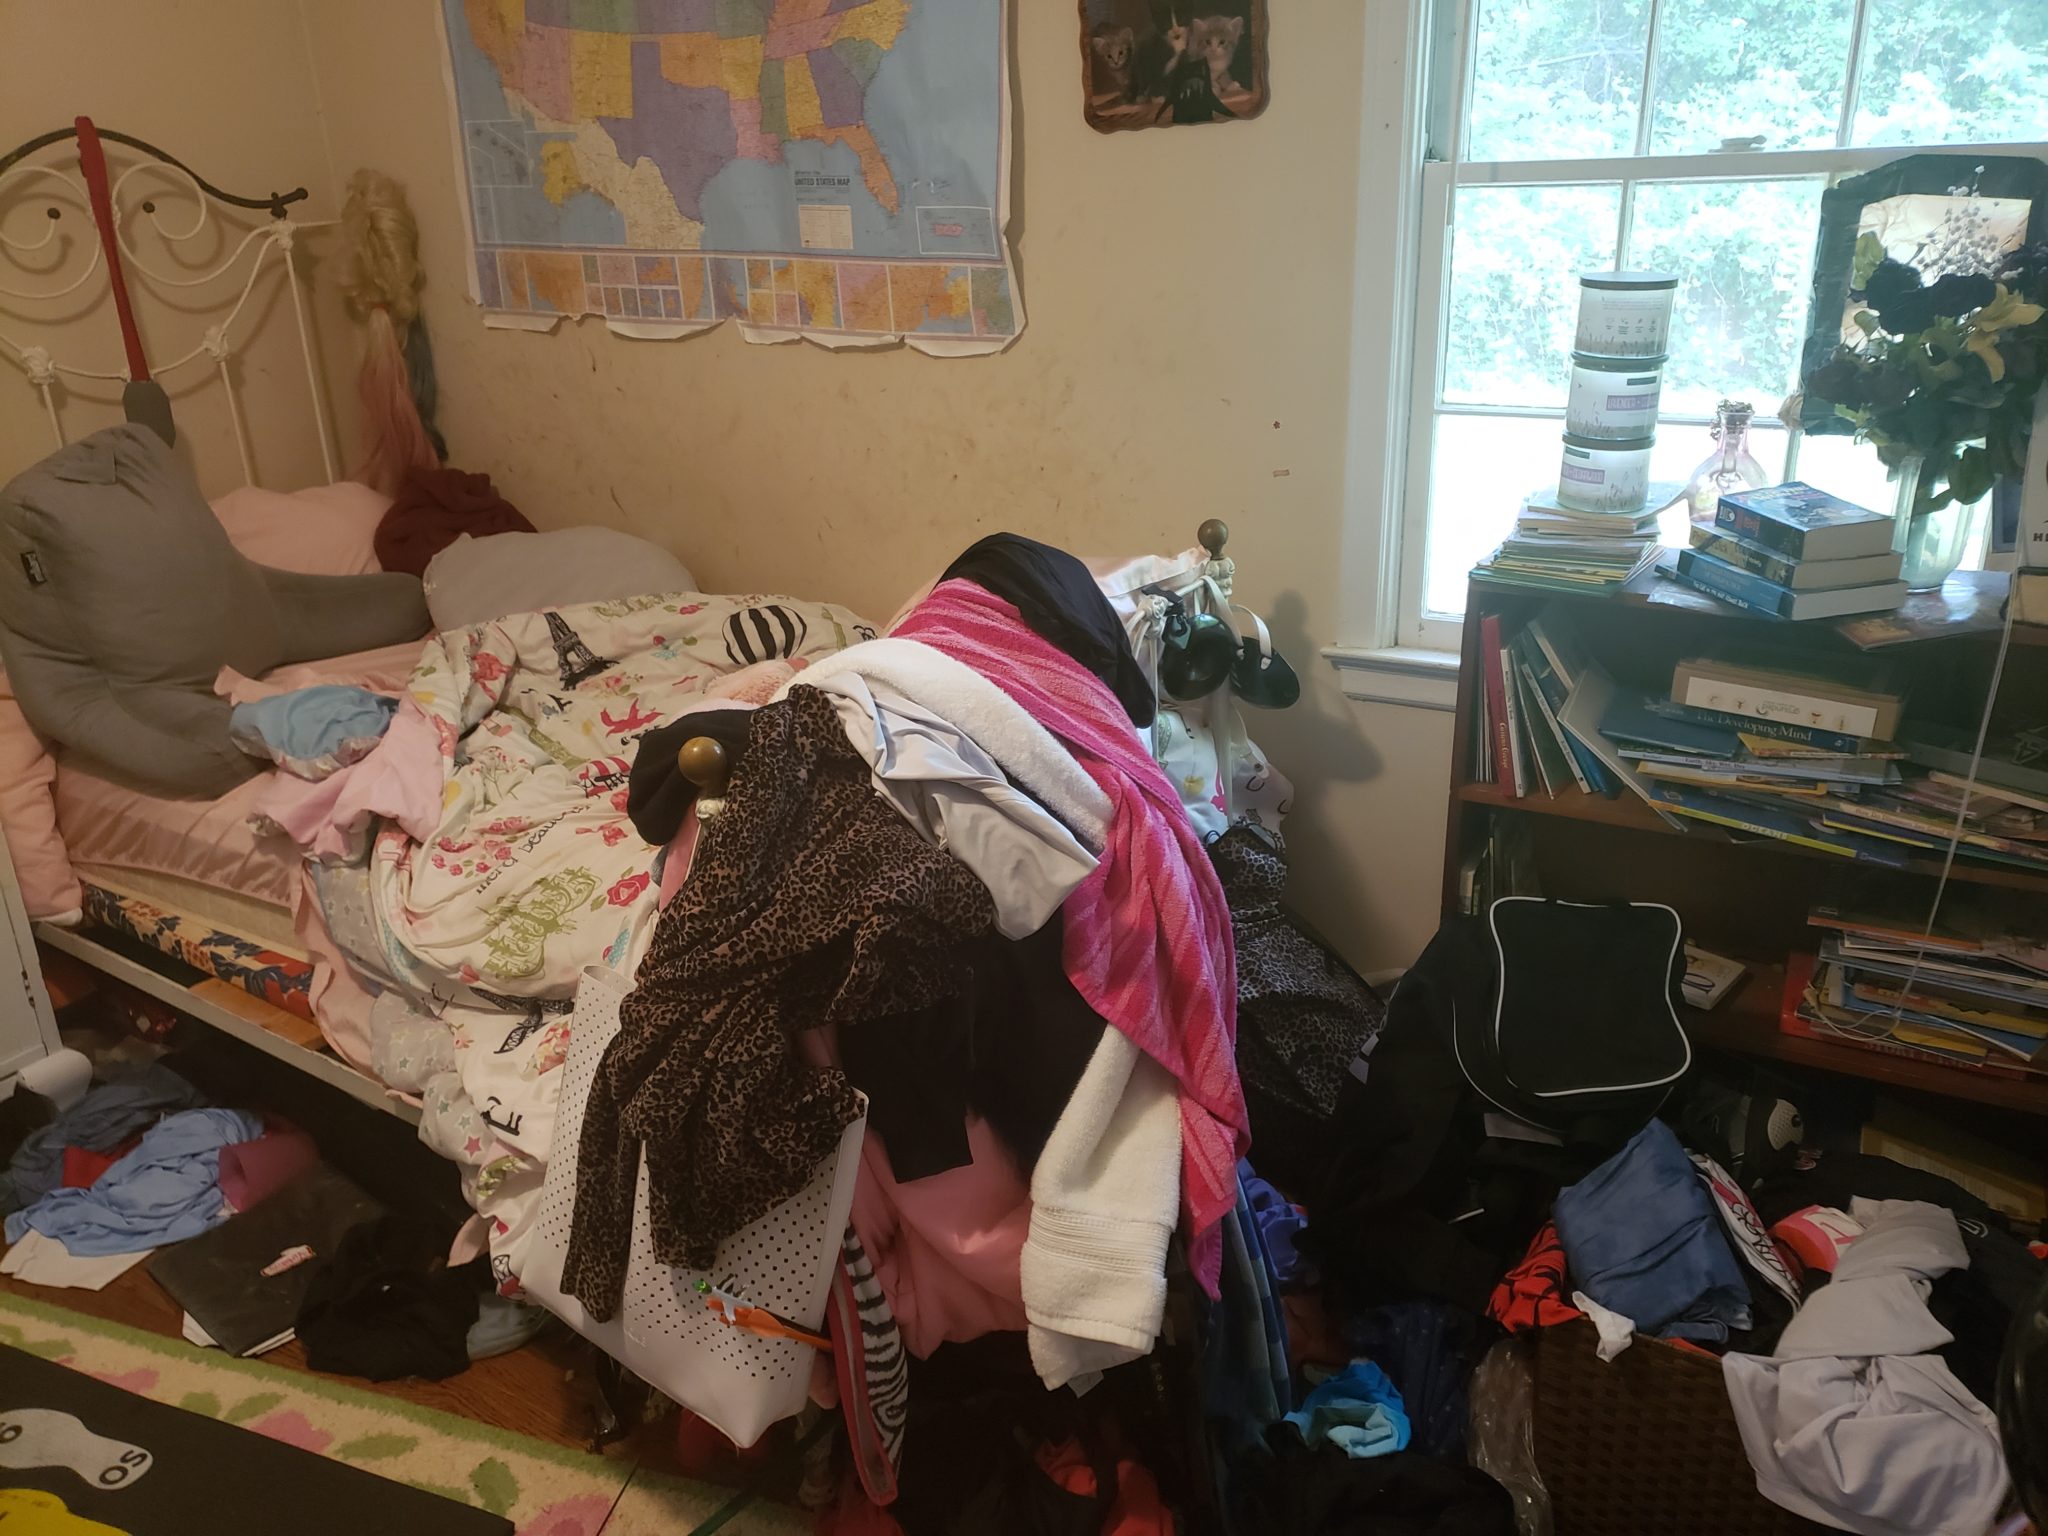 Is a Messy Room a Sign of Teen Mental Health Problems?